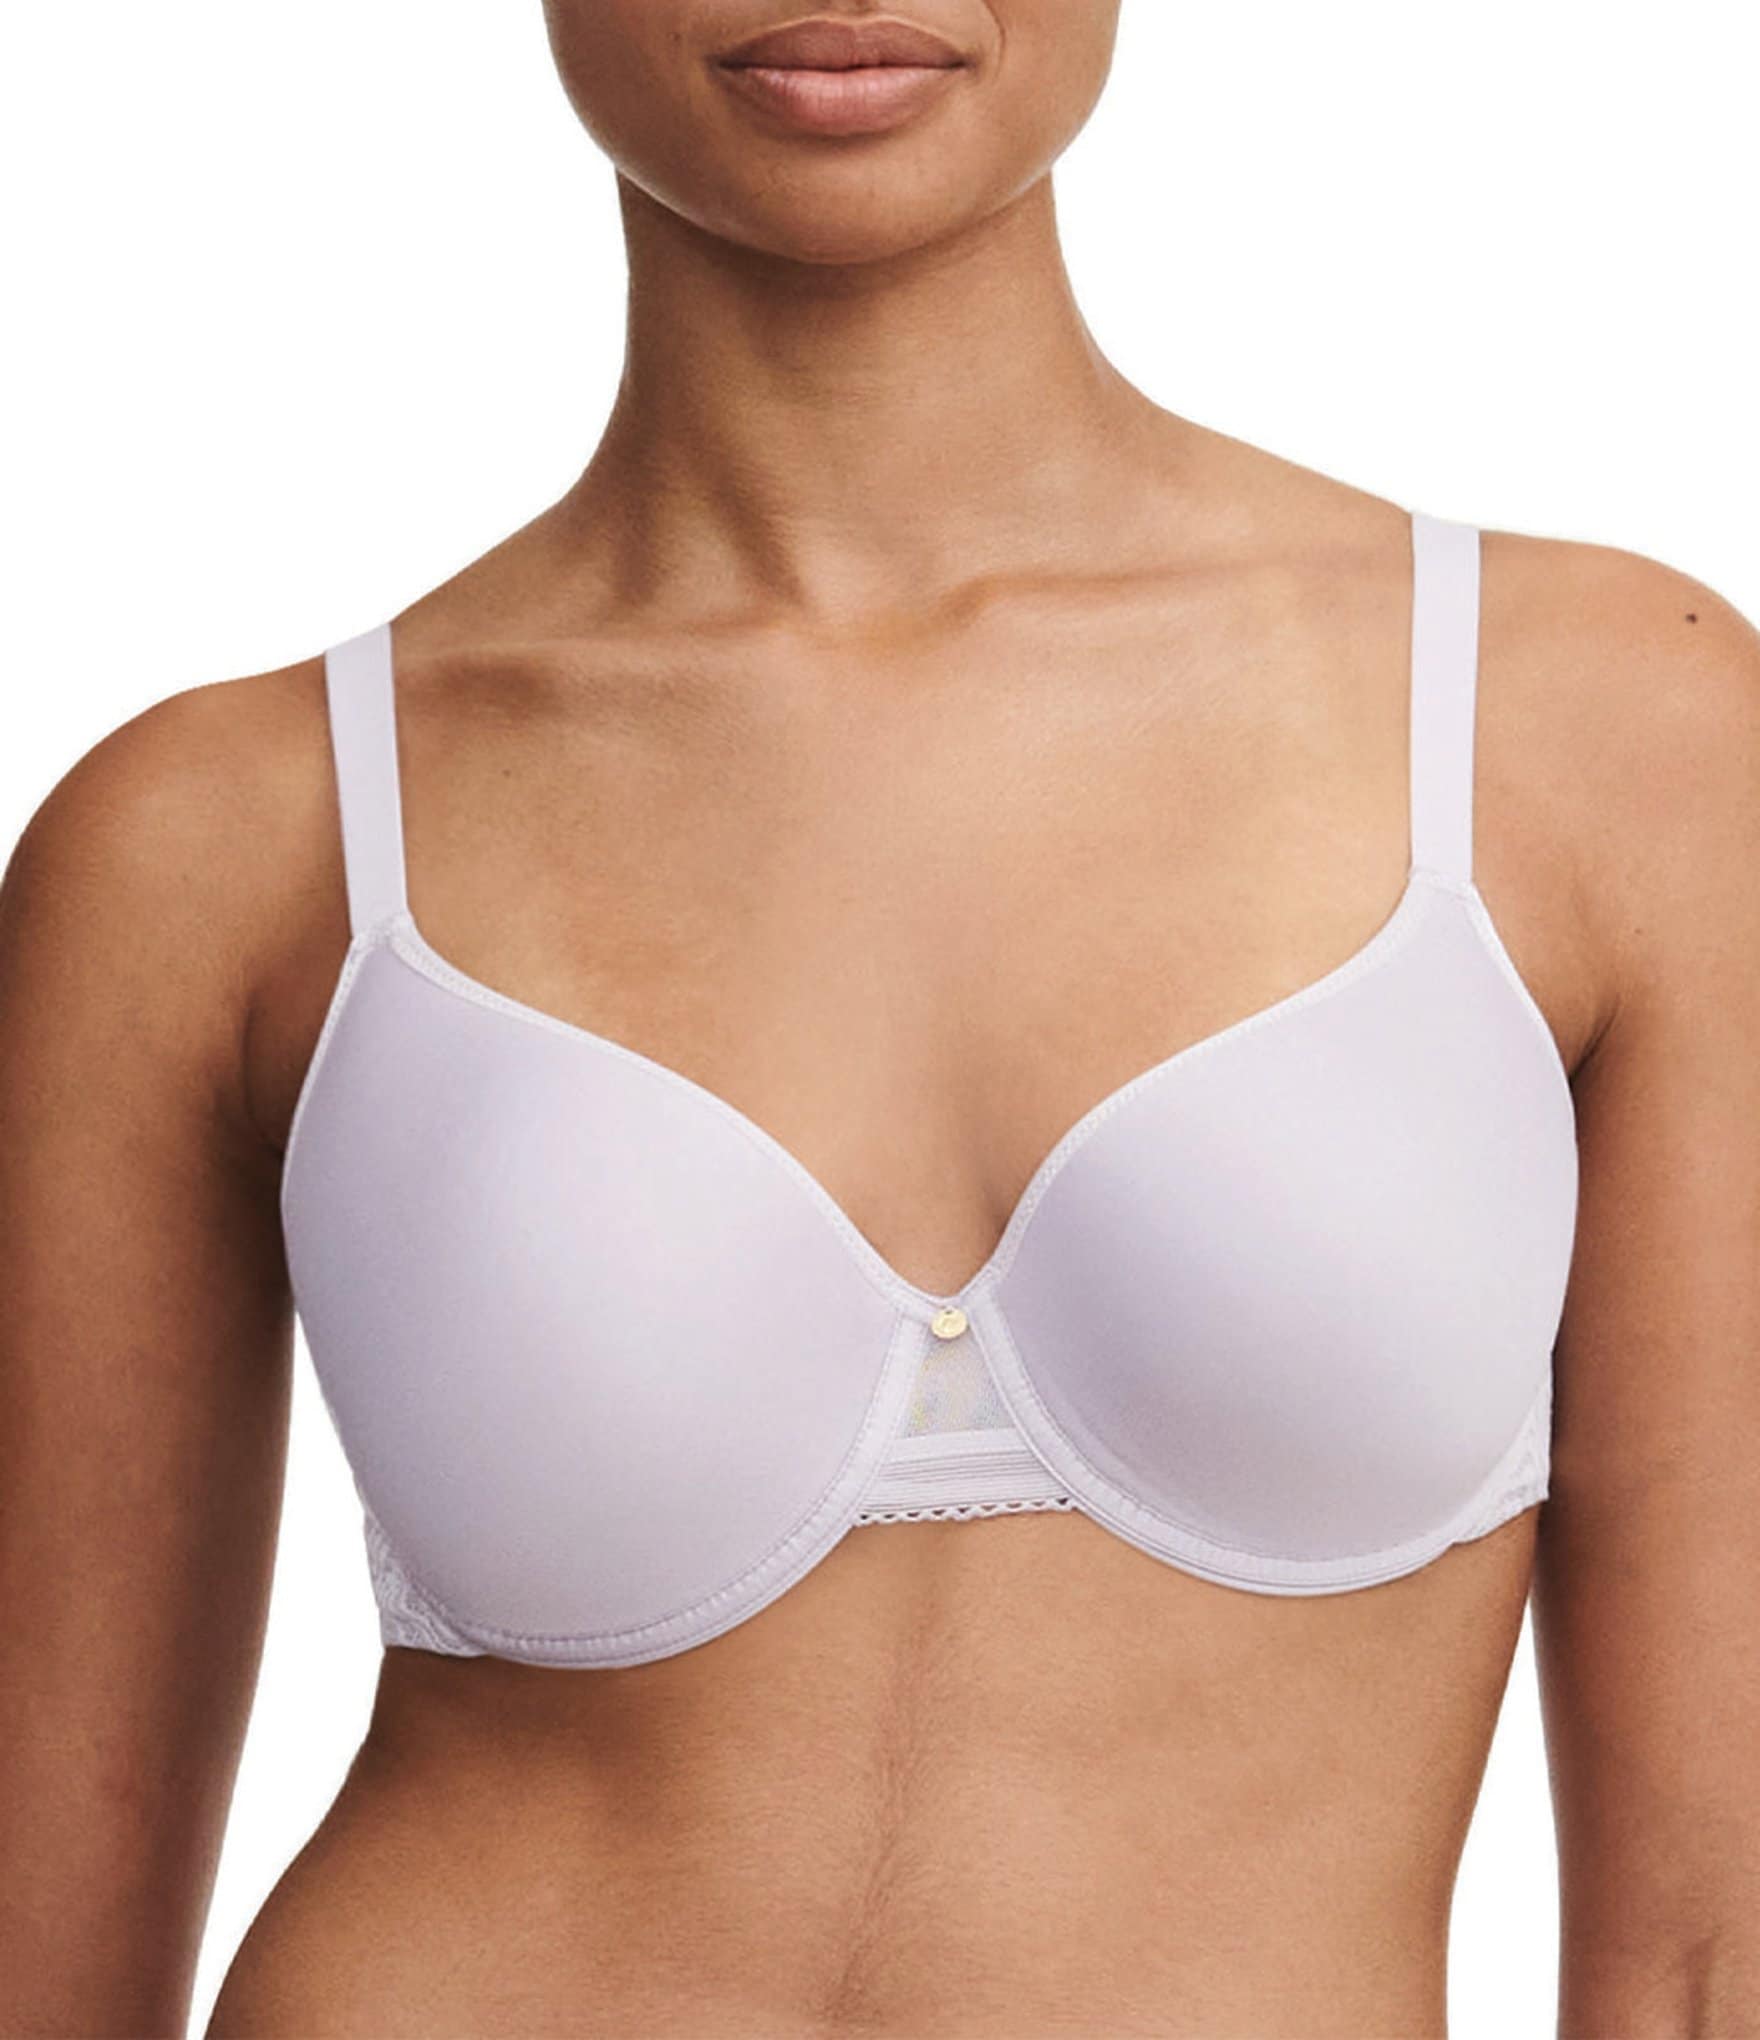 Buy Imported Padded Underwire Convertible Bra for Women/Girls at Lowest  Price in Pakistan